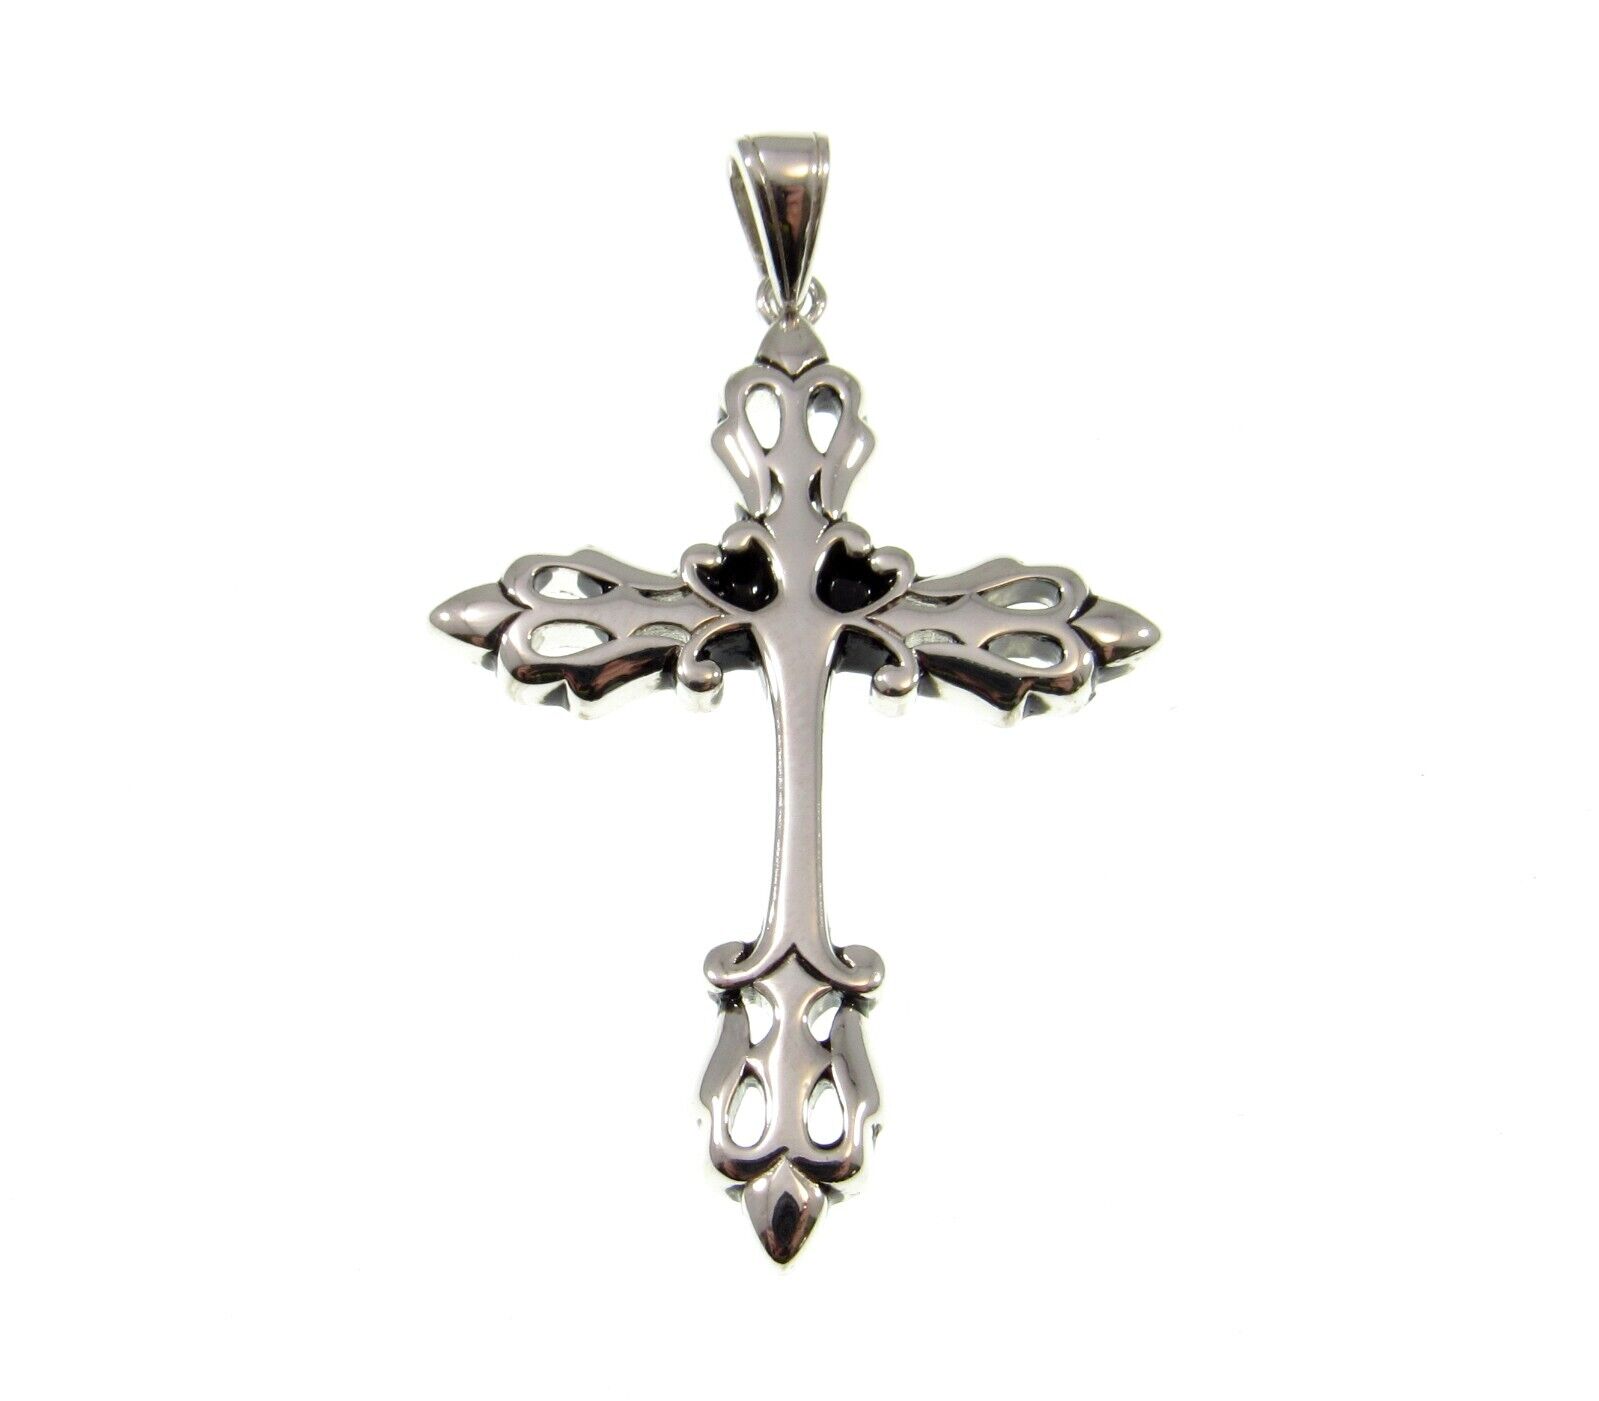 Handcrafted Solid 925 Sterling Silver Medieval Cross Pendant, Gothic Jewelry